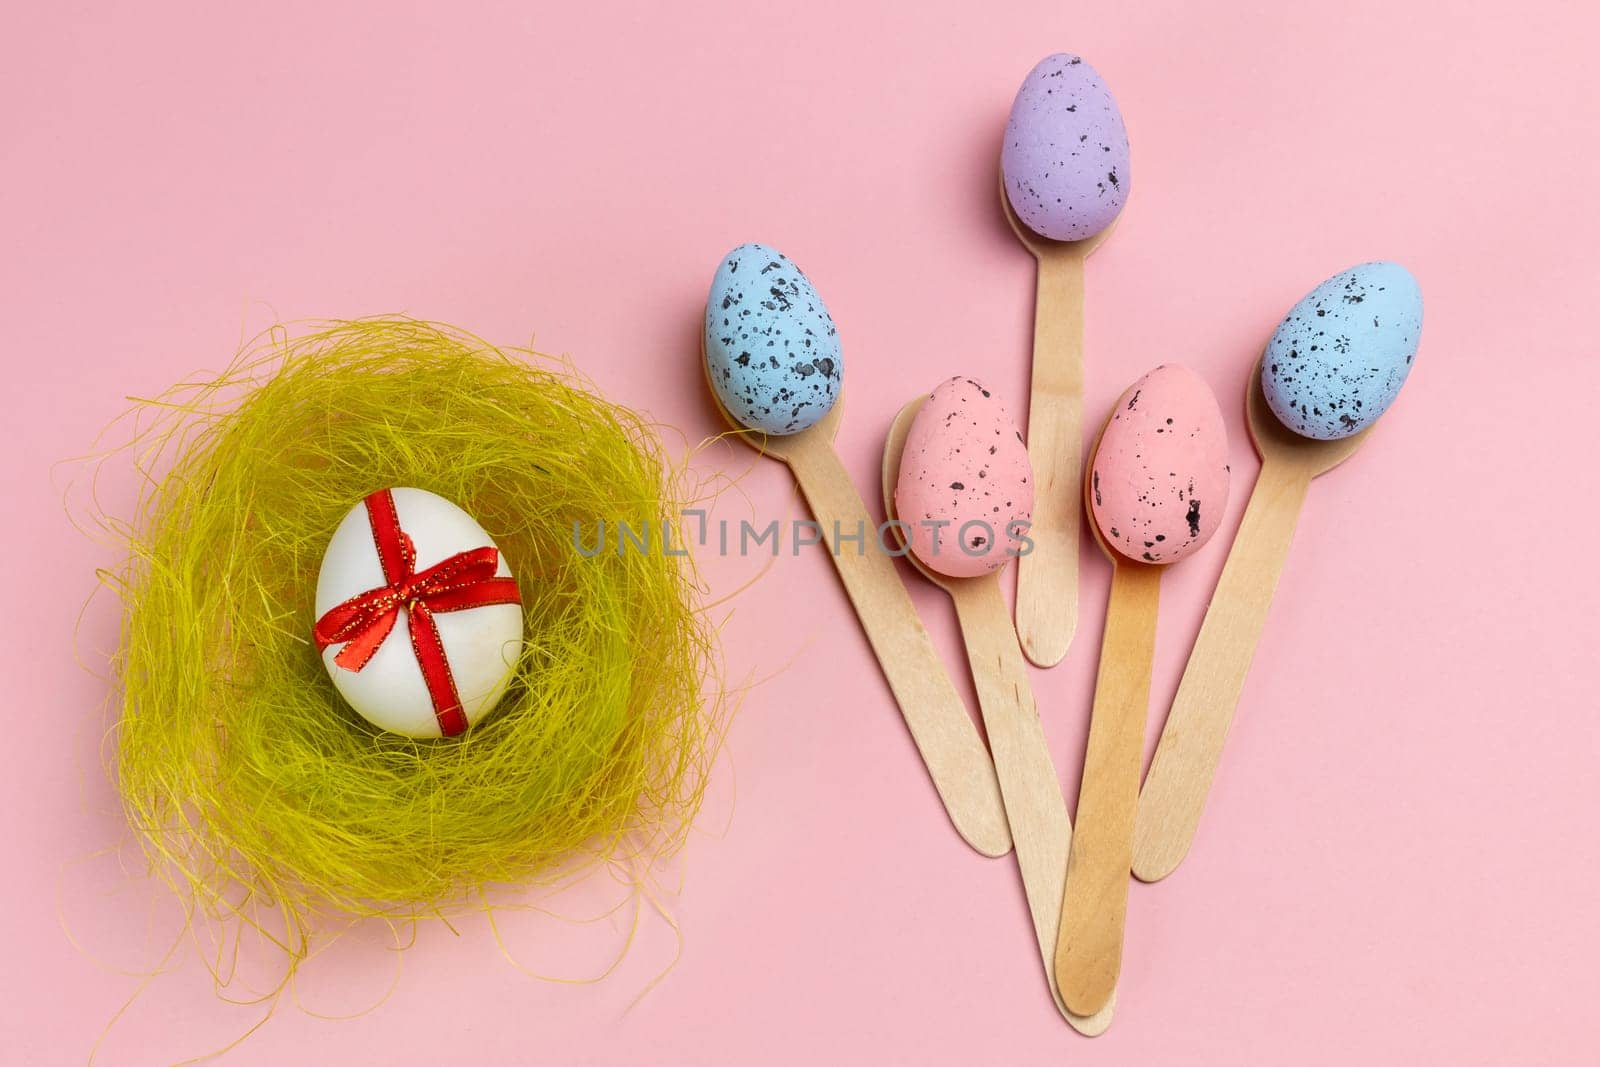 Colored Easter eggs with the nest and the wooden spoons on the pink background. Top view.